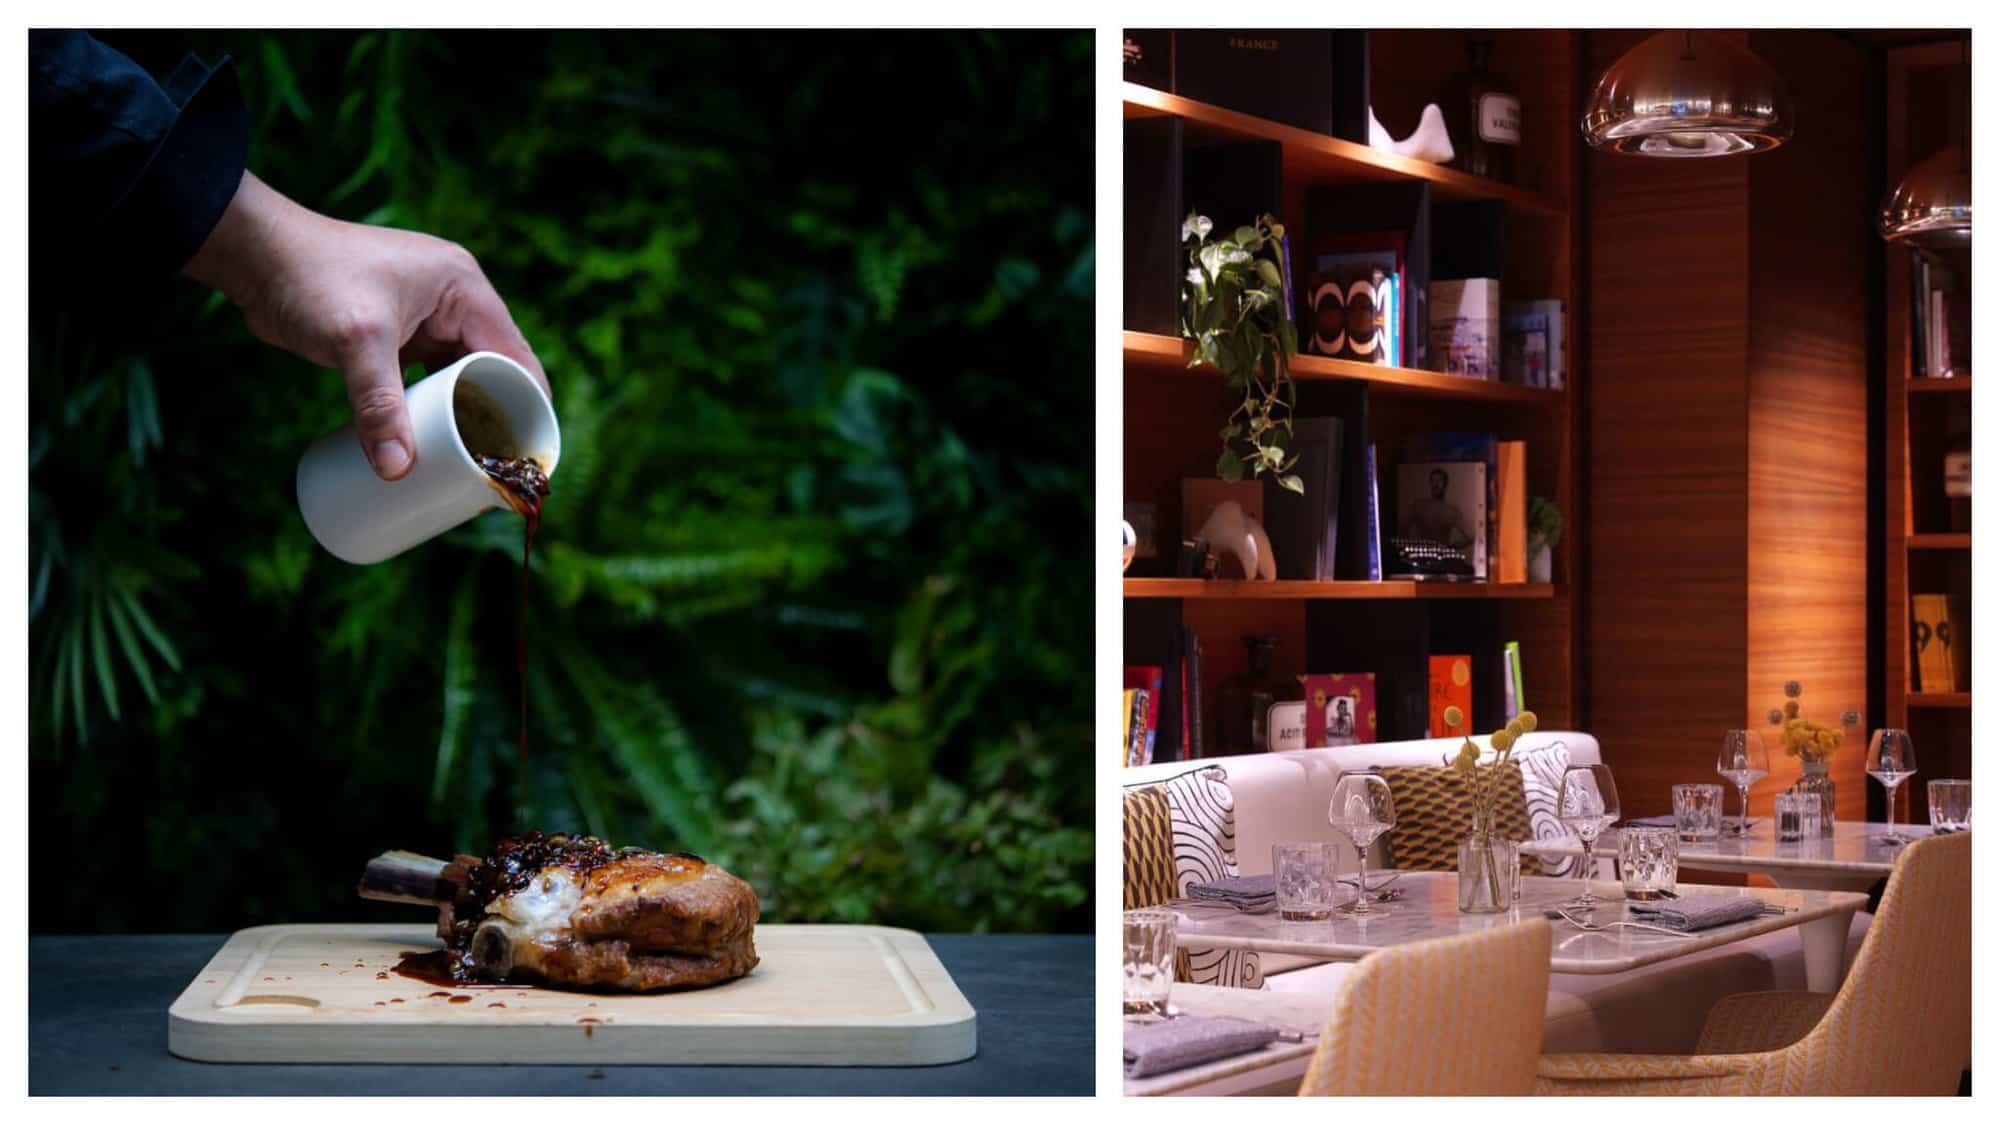 Left: sauce being poured onto a piece of meat on a table in front of a vertical garden wall at Martin restaurant. Right: the interior of Martin restaurant with tables and chairs and bookshelves. 